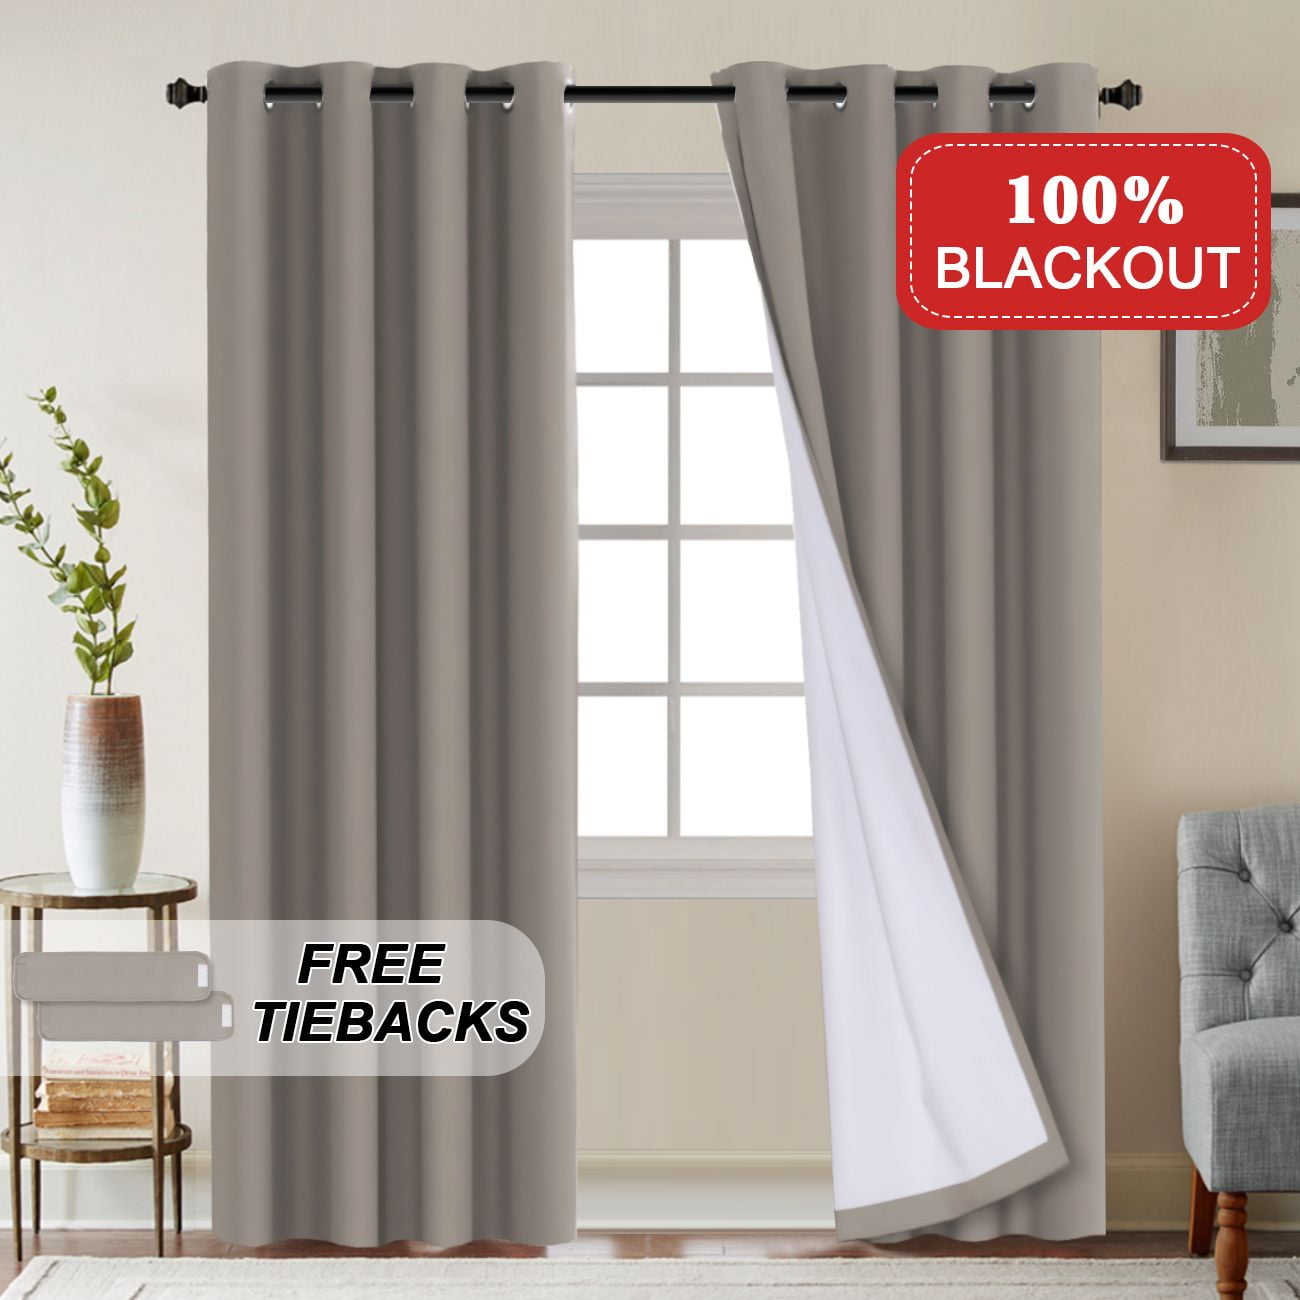 48-84, Black with Antique Bronze Finishing Bundle H.VERSAILTEX 100% Blackout Curtains 84 Inches Long Full Light Blocking Curtain Draperies and Single Window Curtain Rod Set with Classic Finial